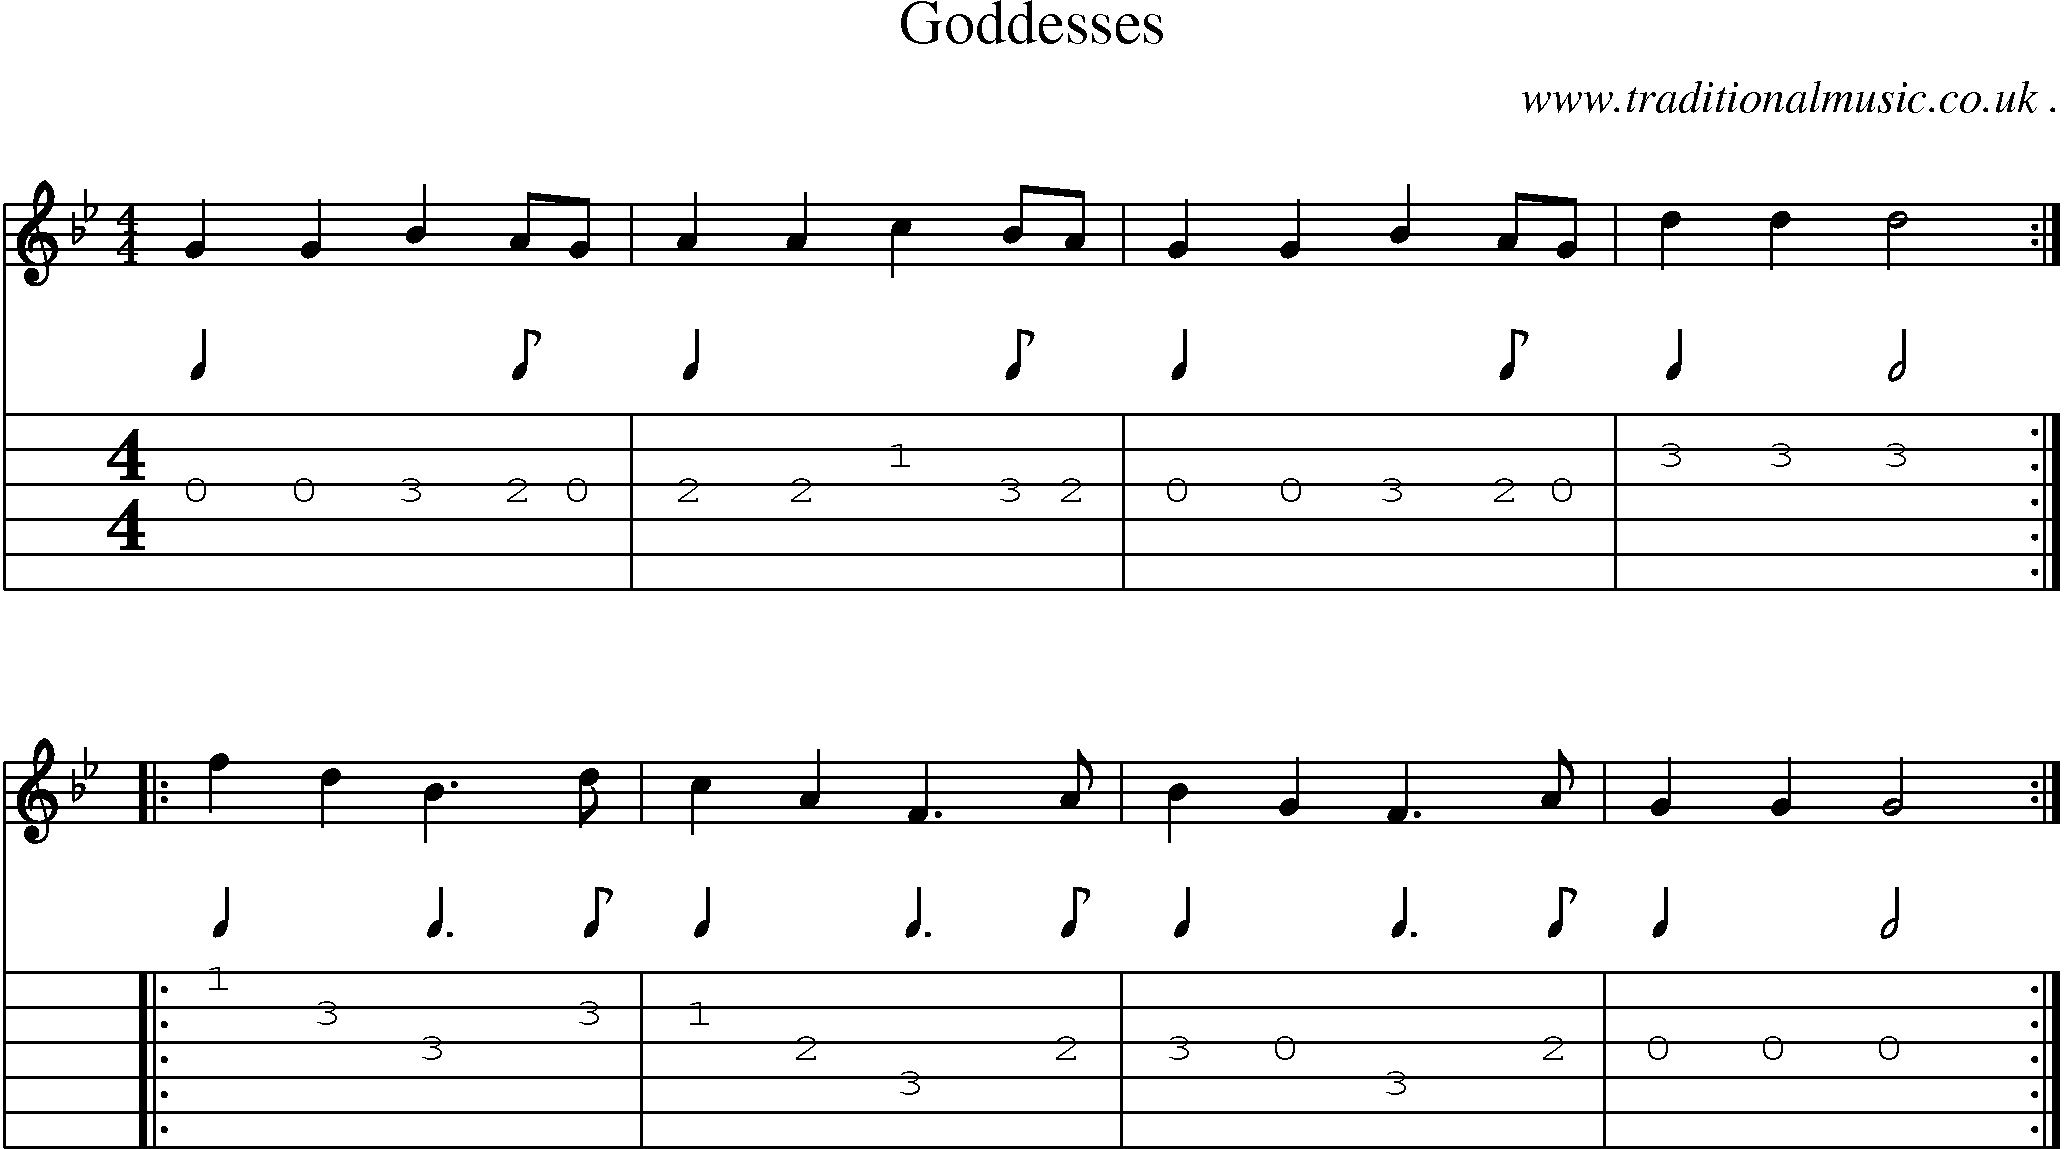 Sheet-Music and Guitar Tabs for Goddesses